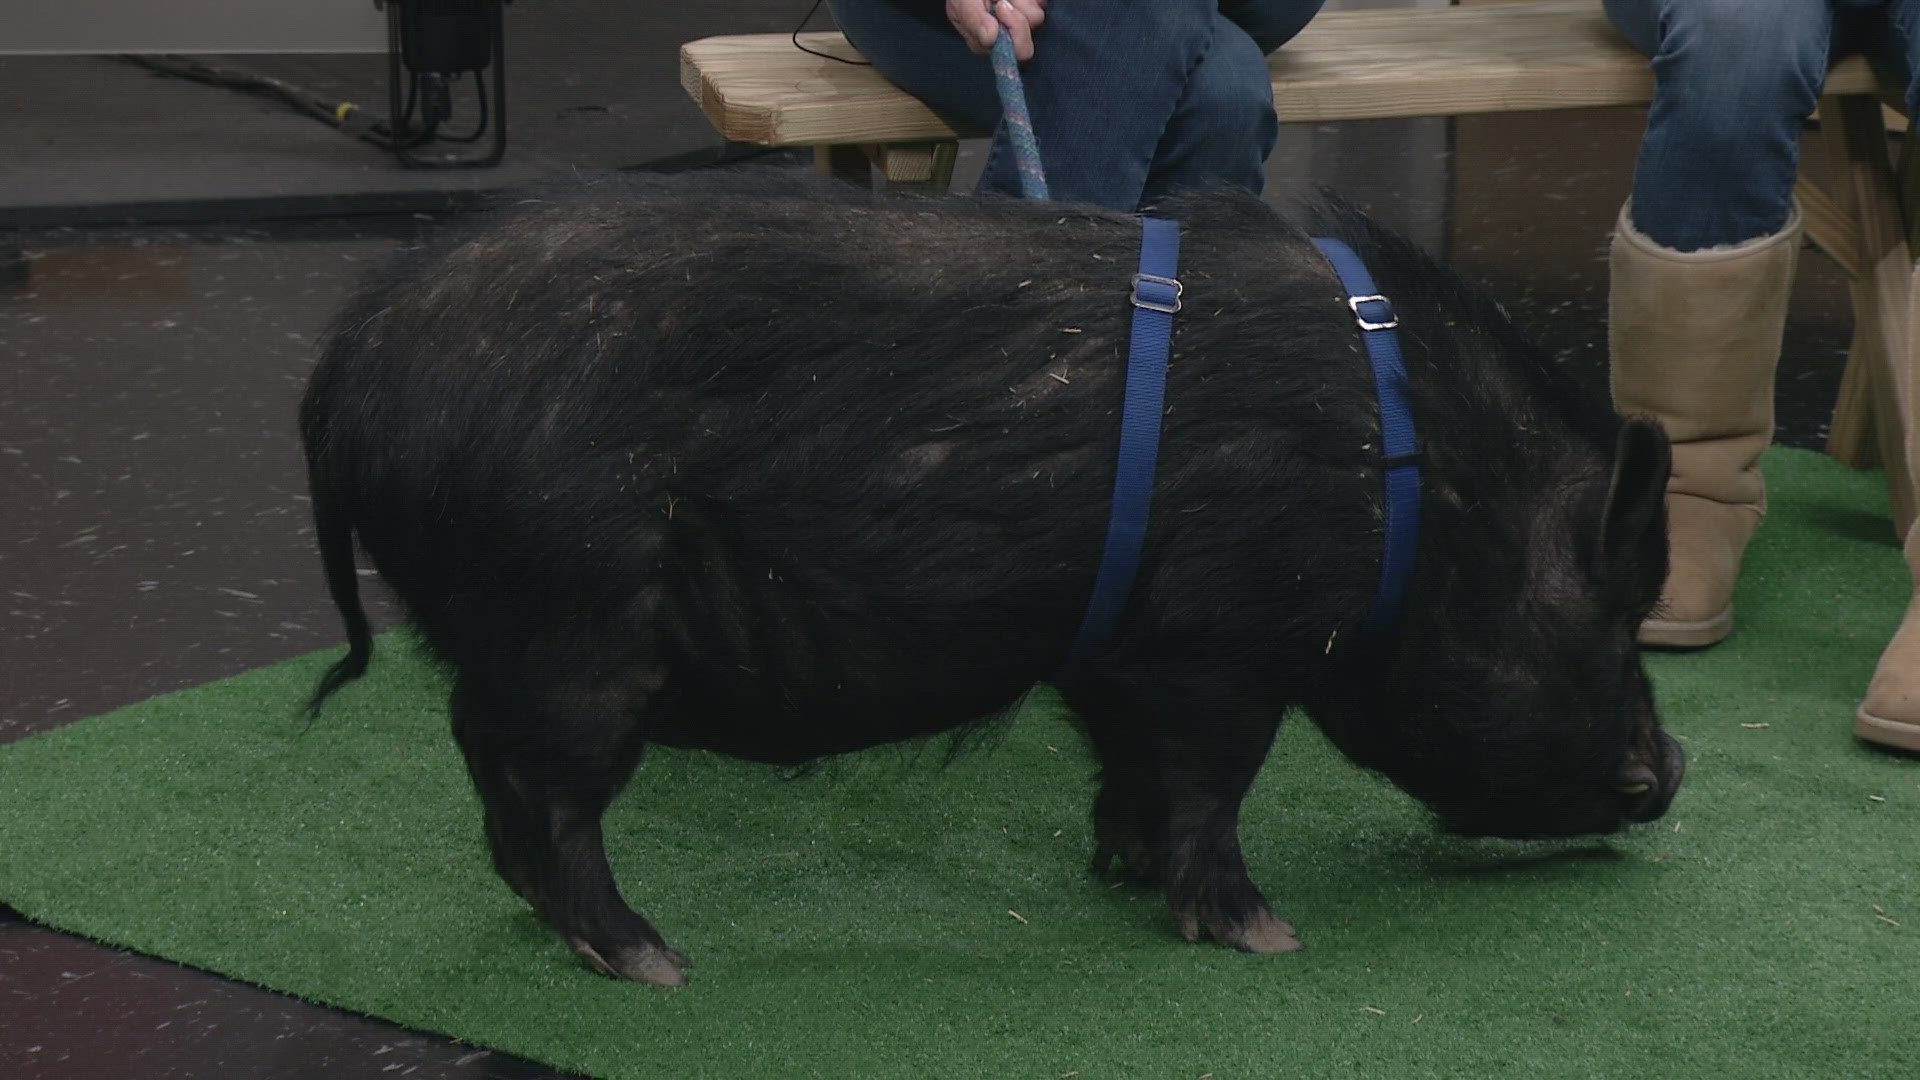 Happy Trails Farm Animal Sanctuary joins 3News with Pattycake, a 9-year-old potbelly pig who is currently up for adoption at the farm.